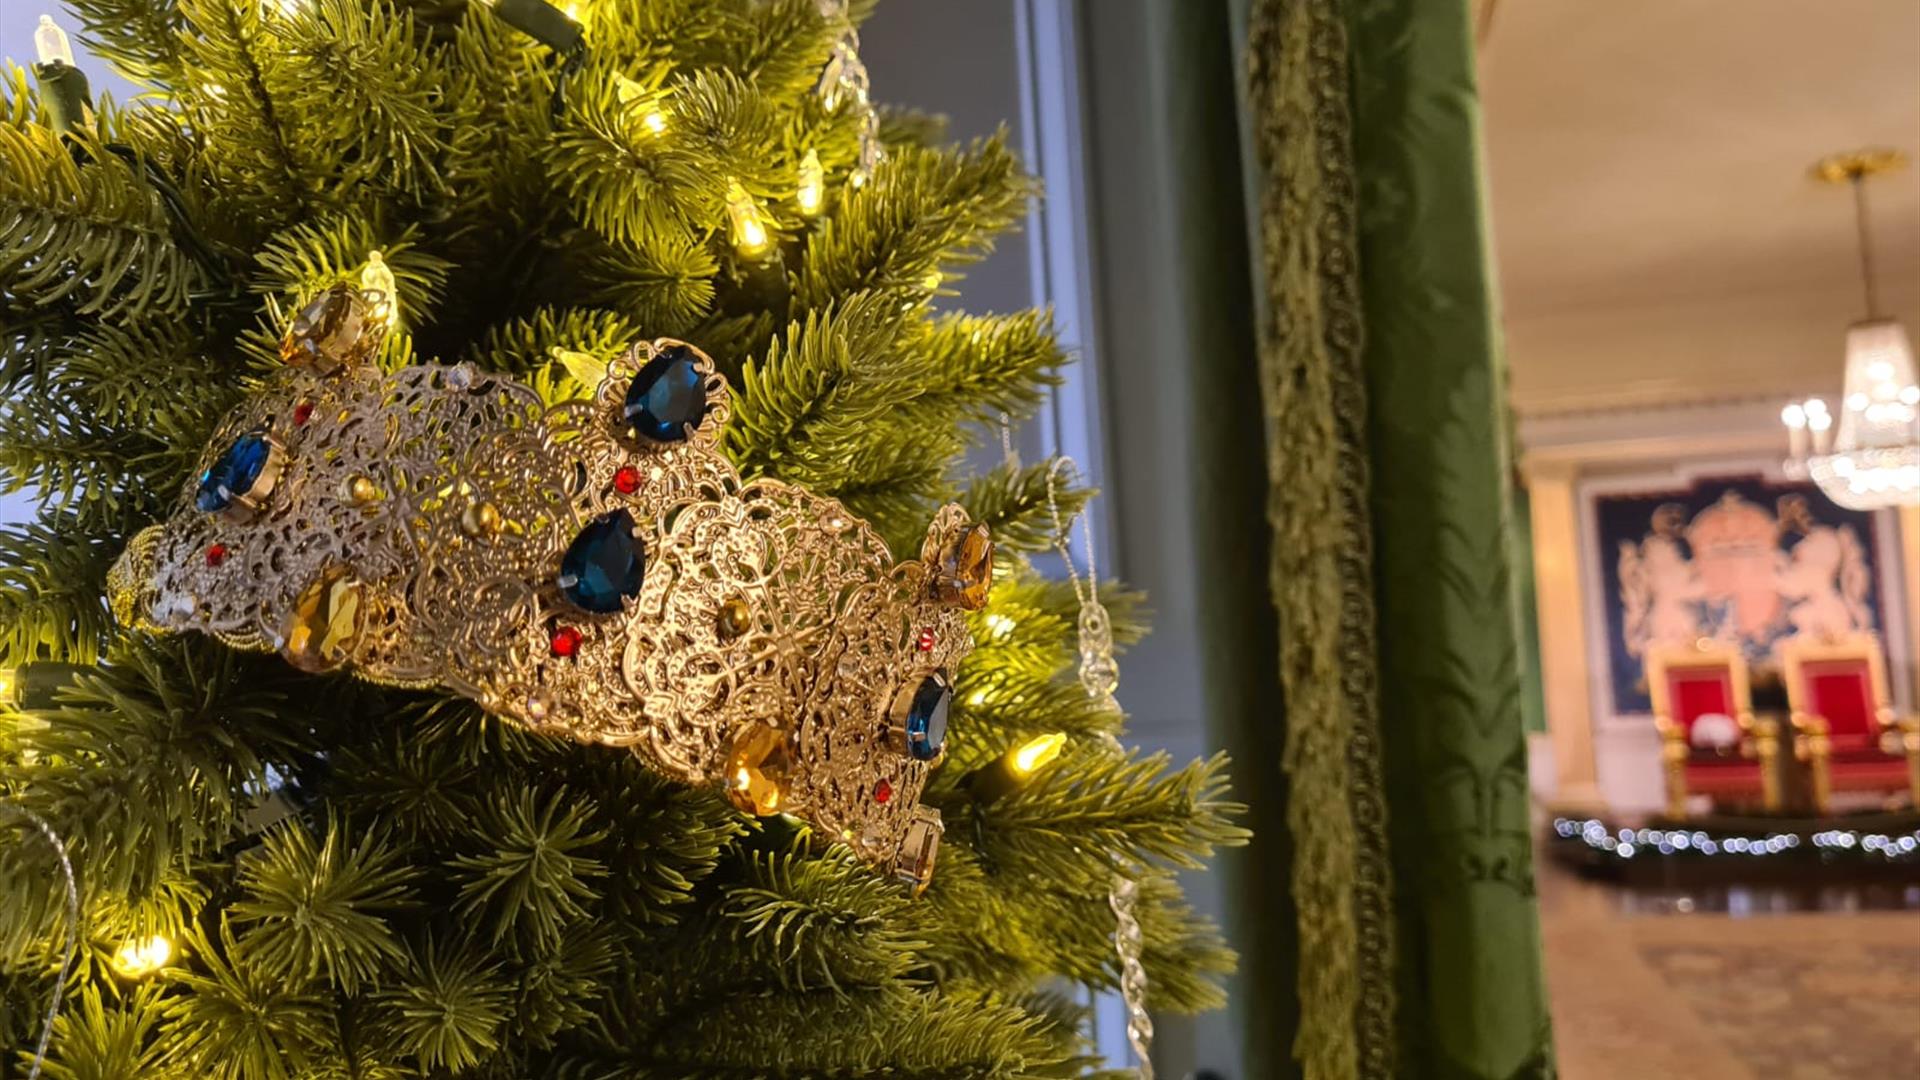 An image of a Christmas tree by the entrance to the Throne Room. The tree has lights and a gold crown with jewels.